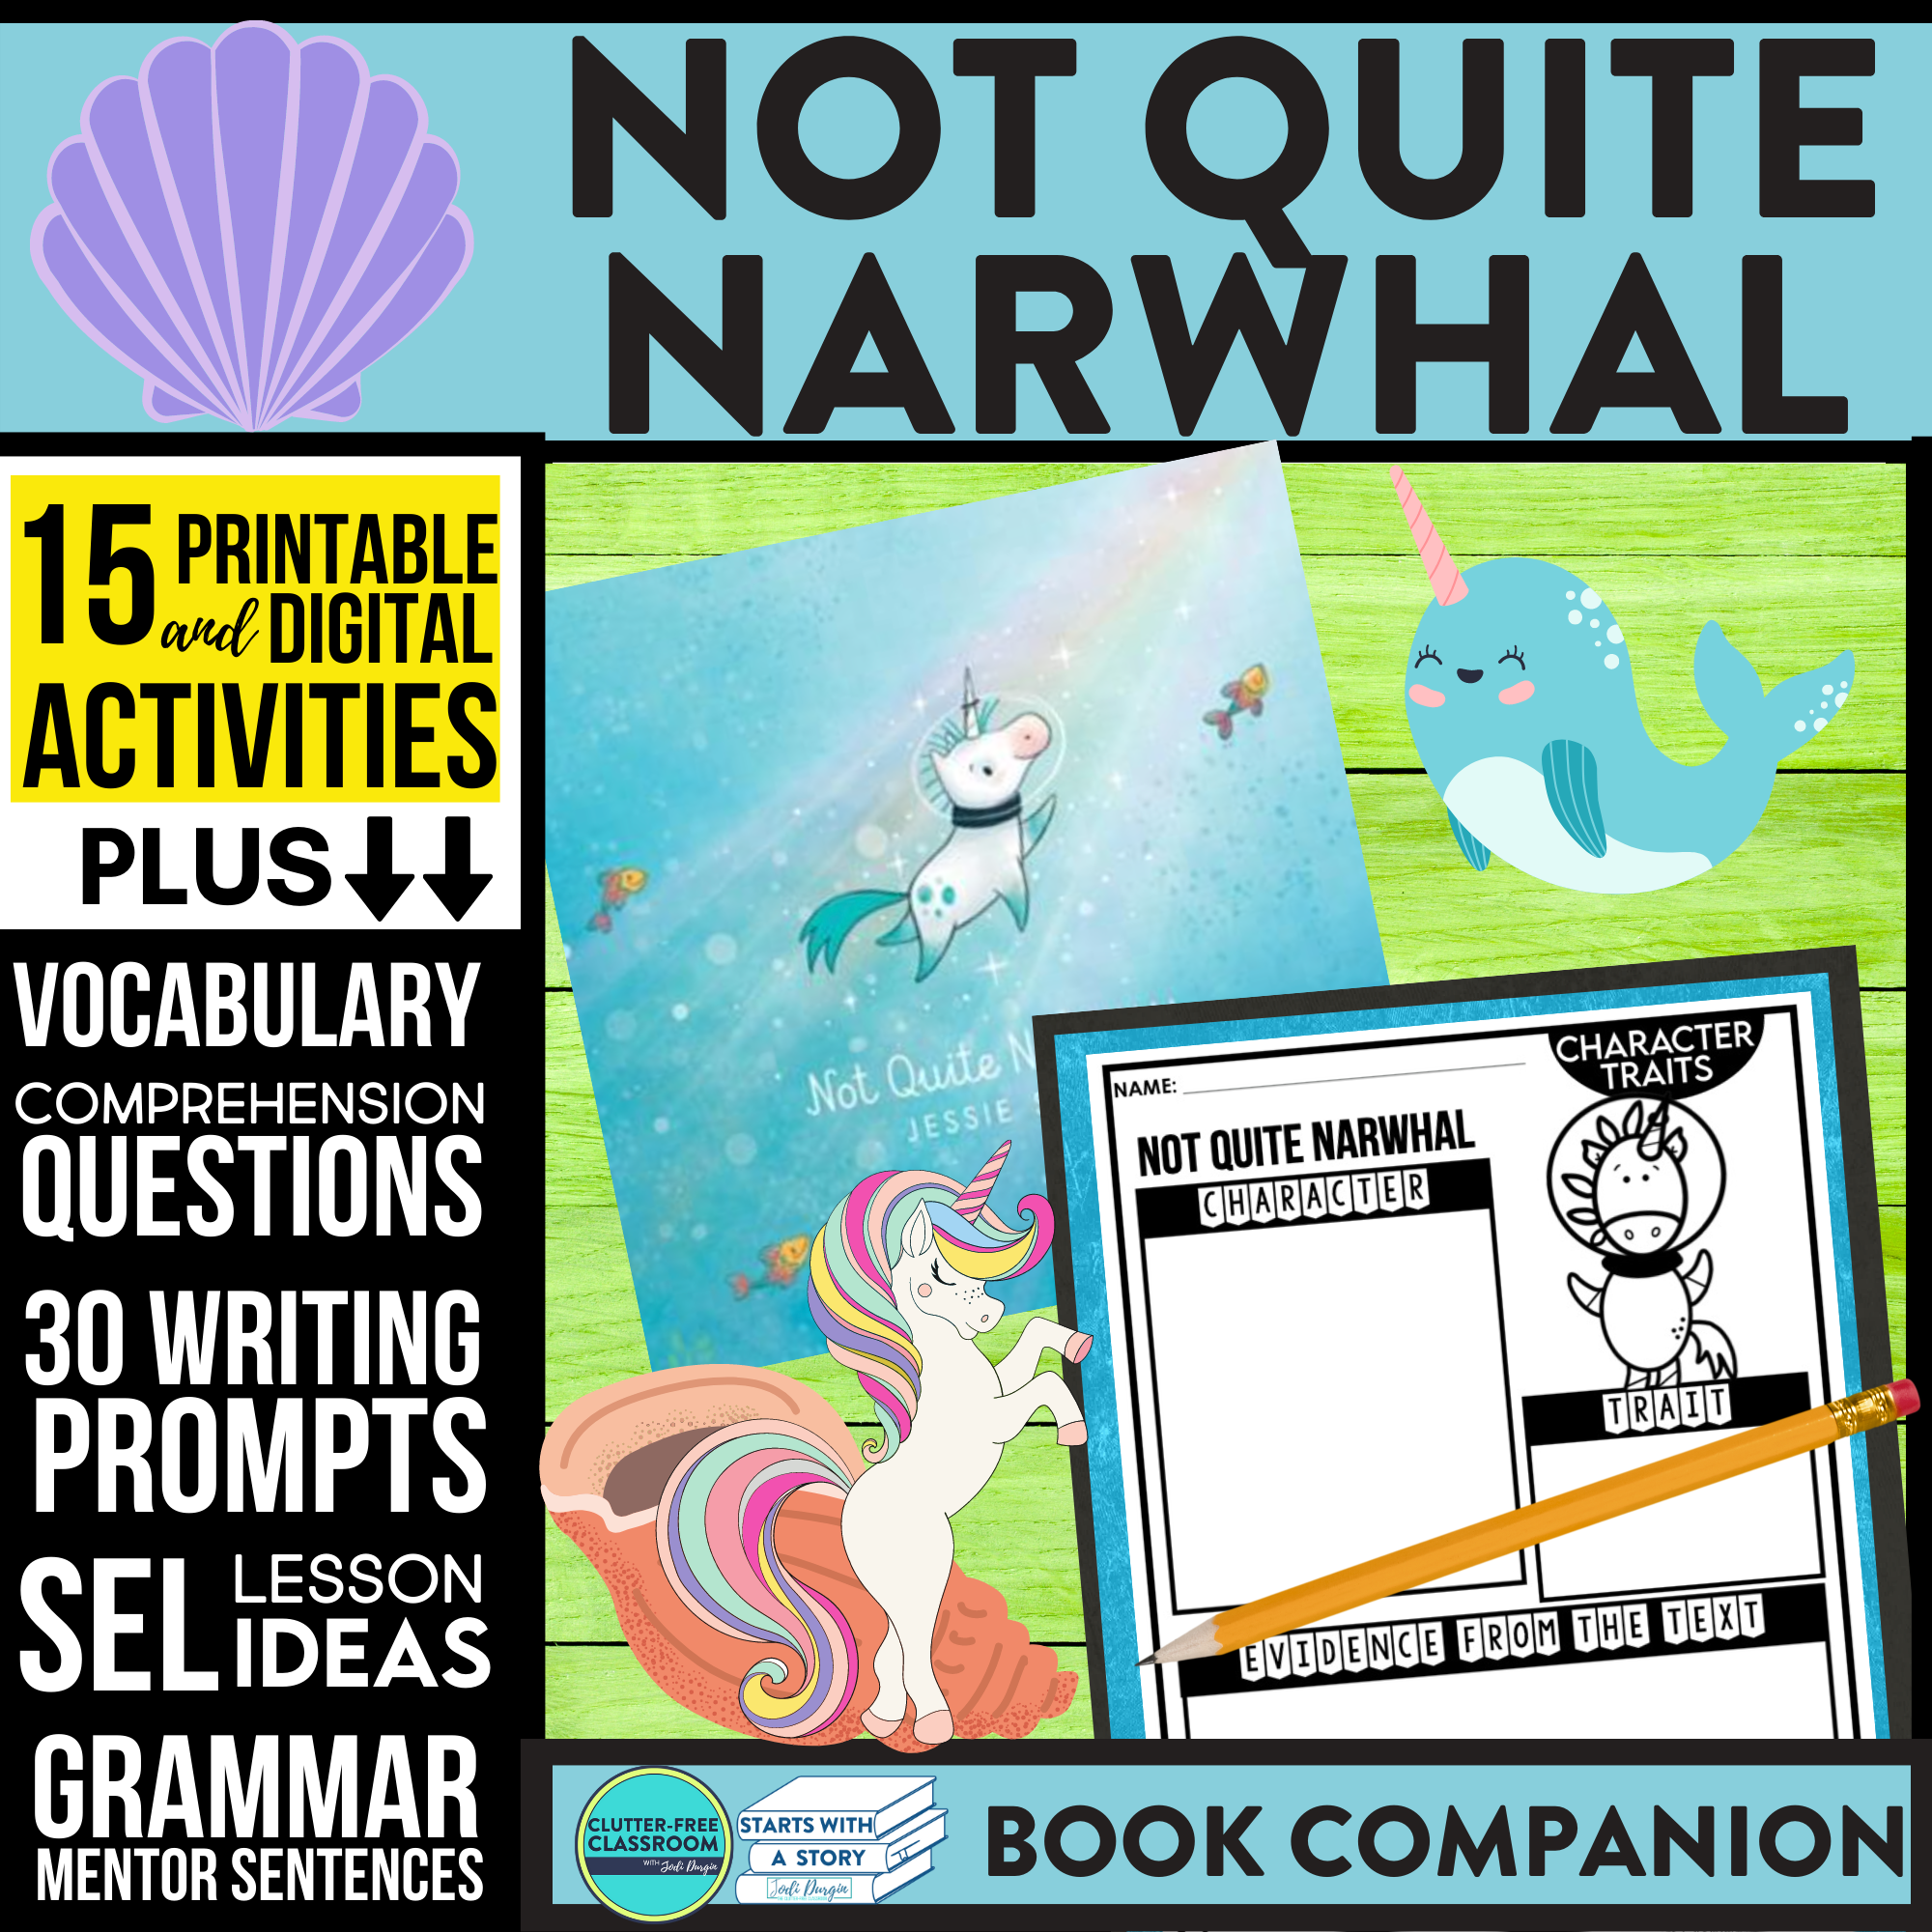 NOT QUITE NARWHAL activities and lesson plan ideas